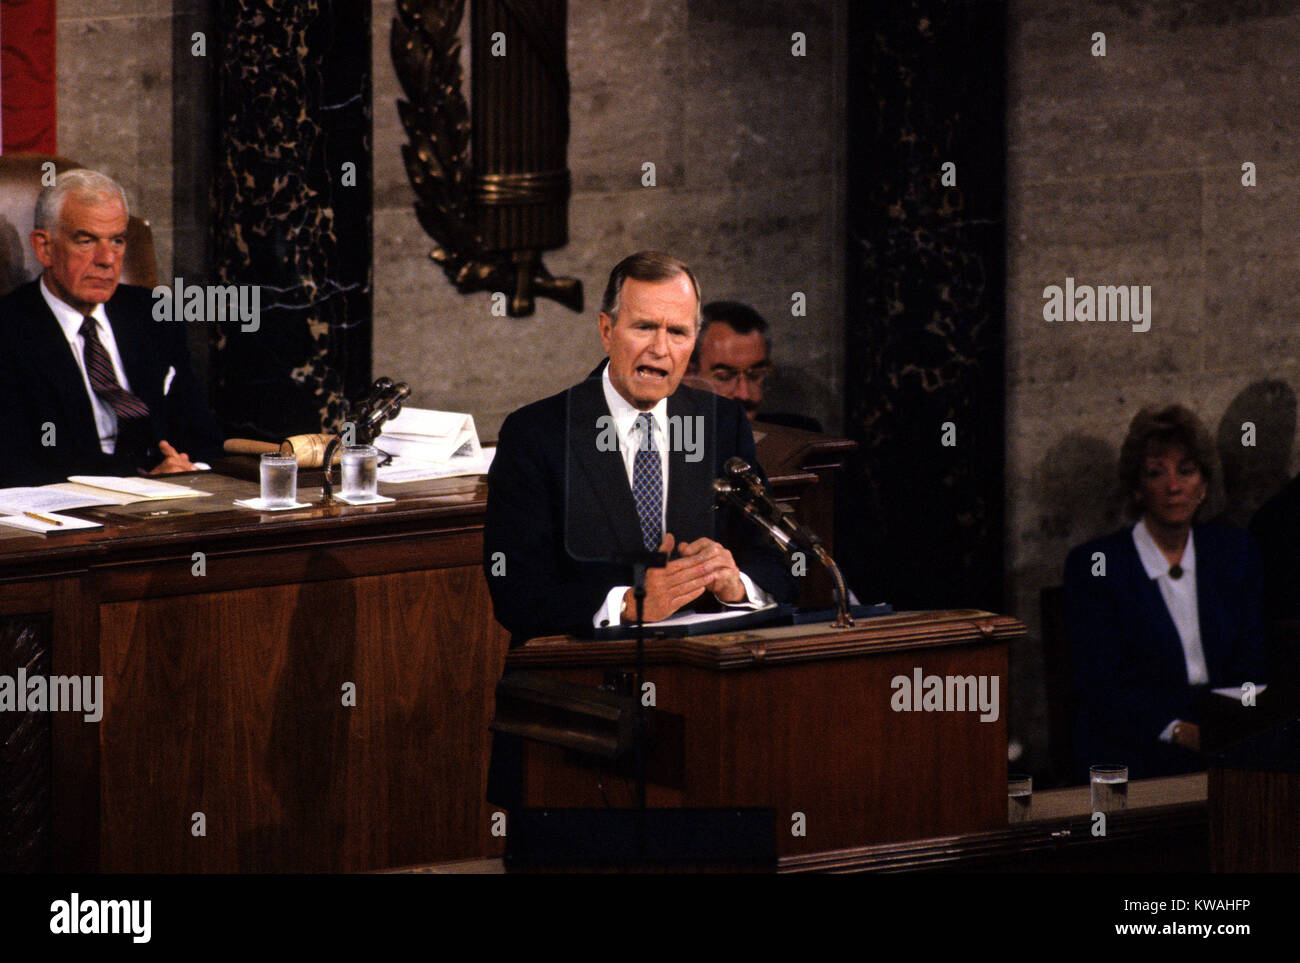 Washington, District of Columbia, USA. 11th Sep, 1990. United States President George H.W. Bush speaks to a Joint Session of the U.S. Congress on the situation with Iraq and the Persian Gulf and on the federal deficit in the U.S. Capitol in Washington, DC on September 11, 1990. Looking on from left is the Speaker of the US House of Representatives Tom Foley (Democrat of Washington).Credit: Ron Sachs/CNP Credit: Ron Sachs/CNP/ZUMA Wire/Alamy Live News Stock Photo